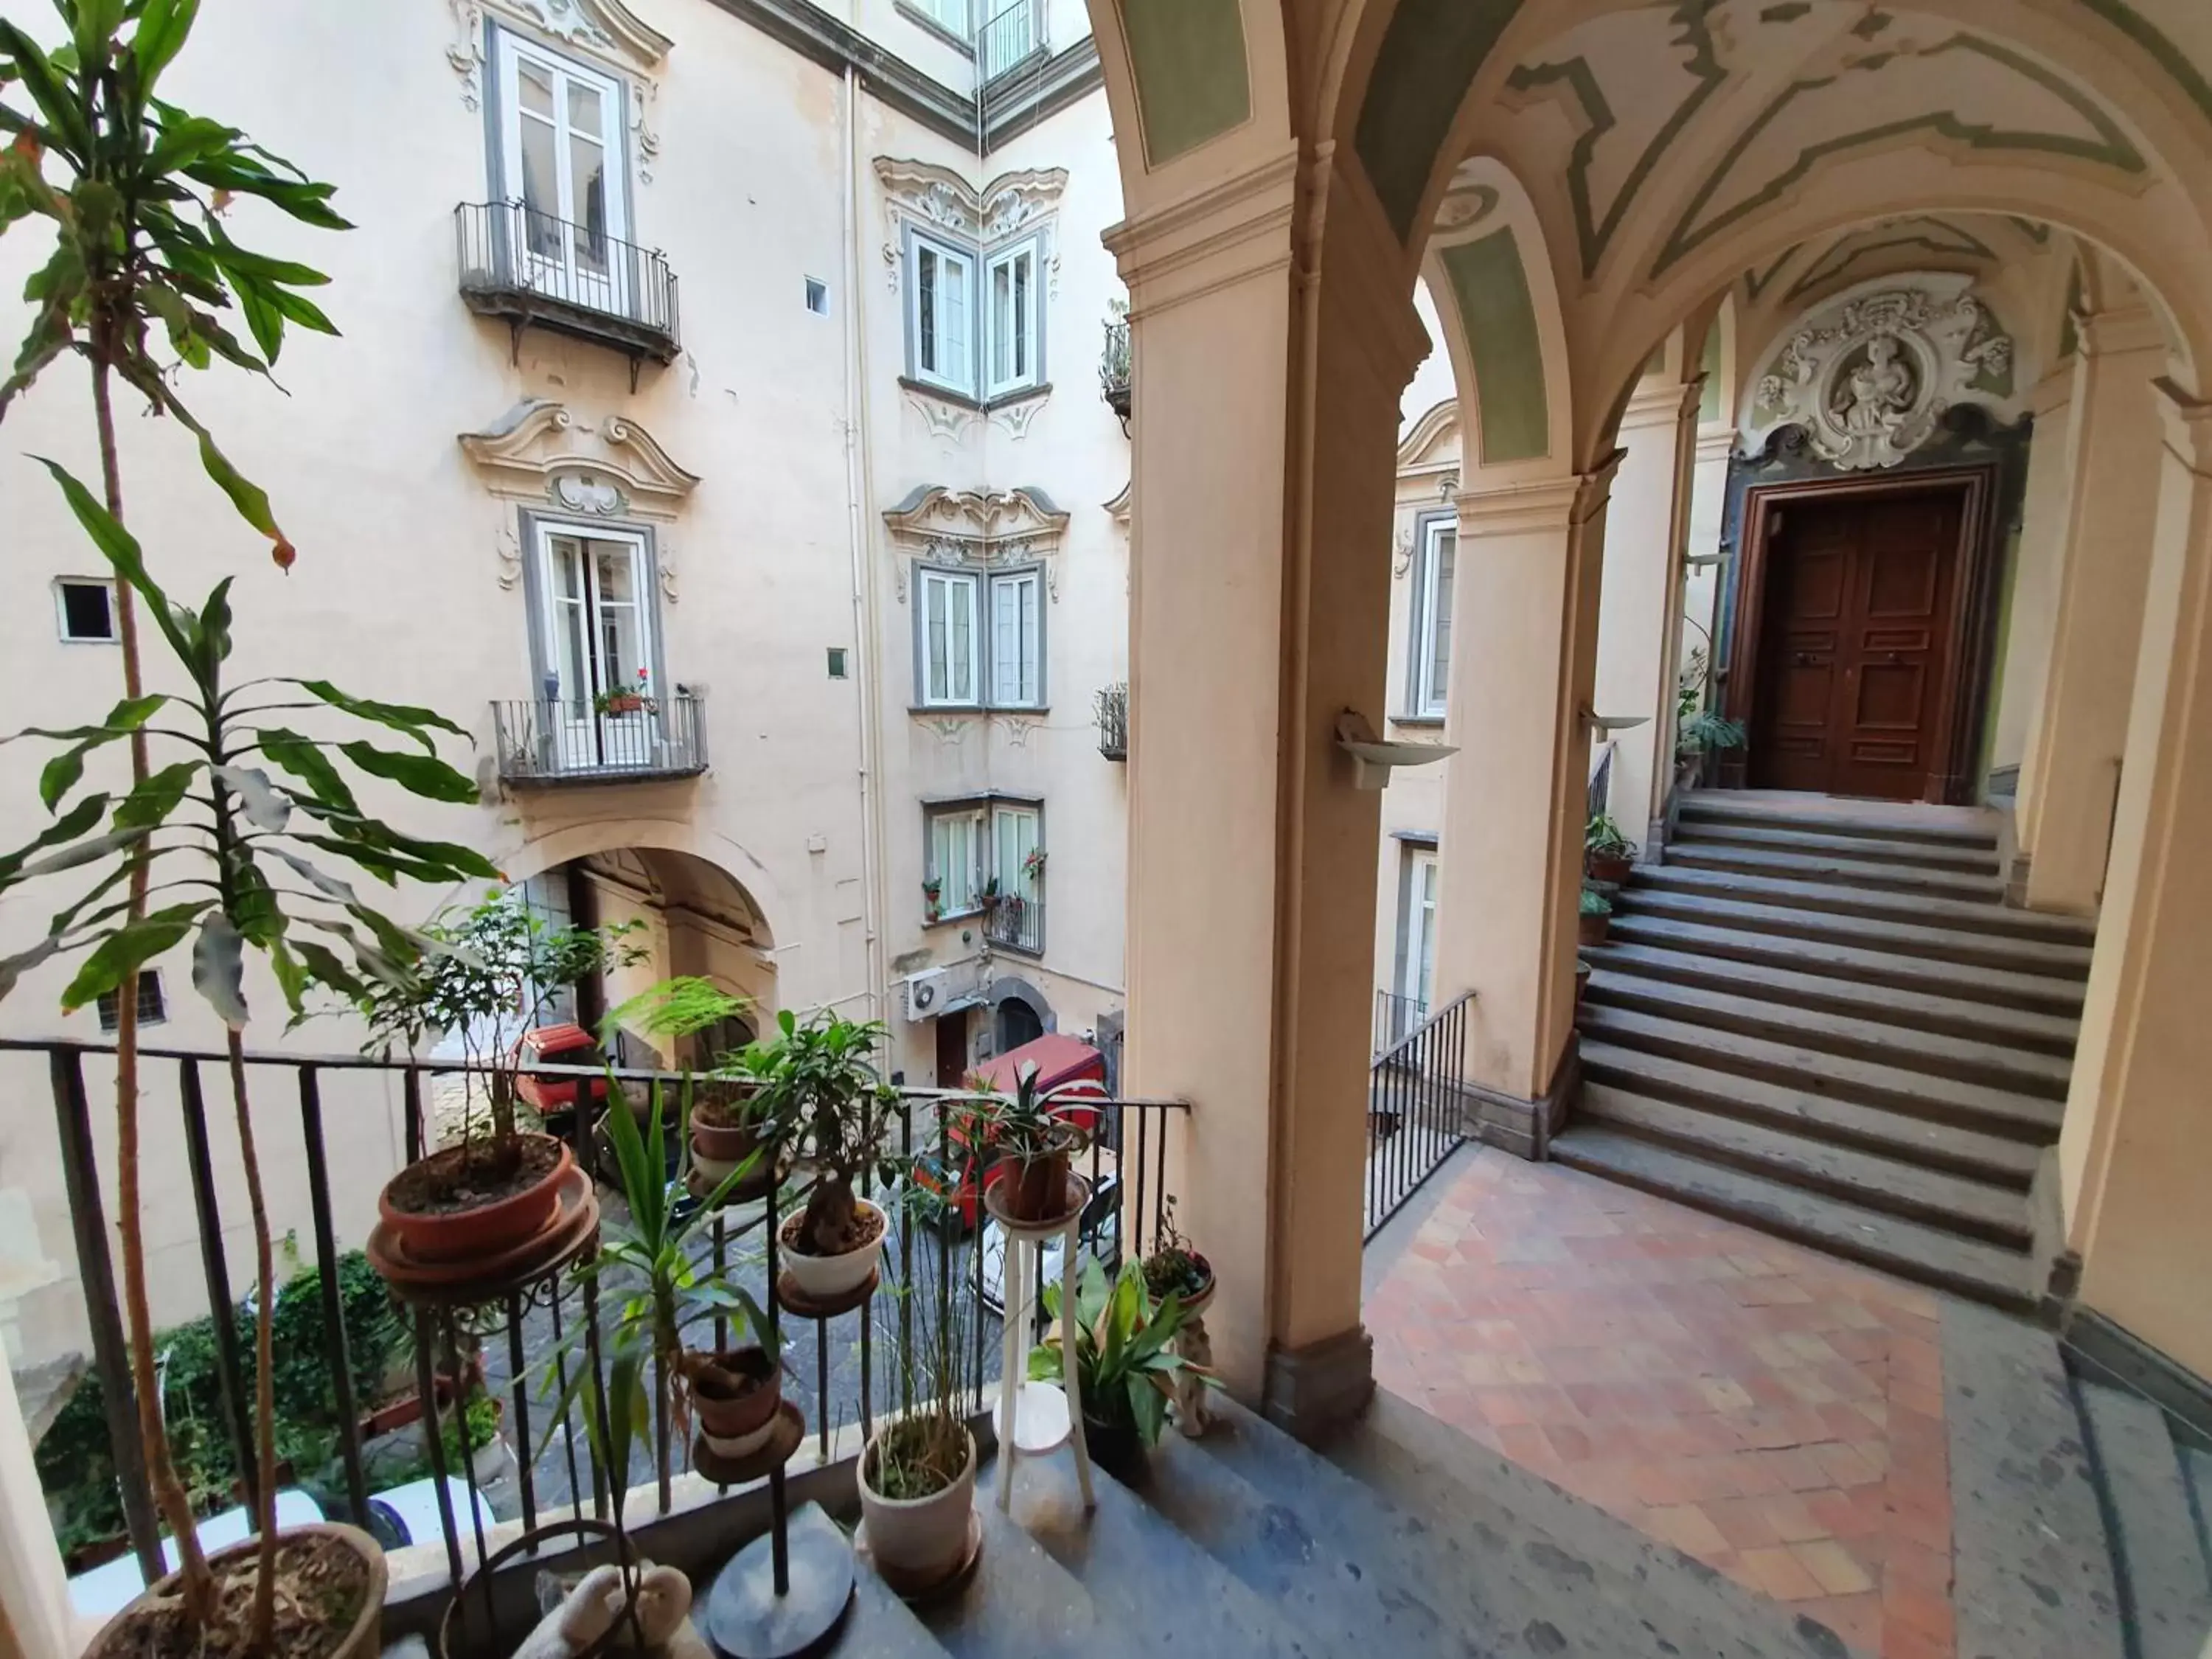 Property building in Spanish Palace Rooms, Suites Apartments & Terraces